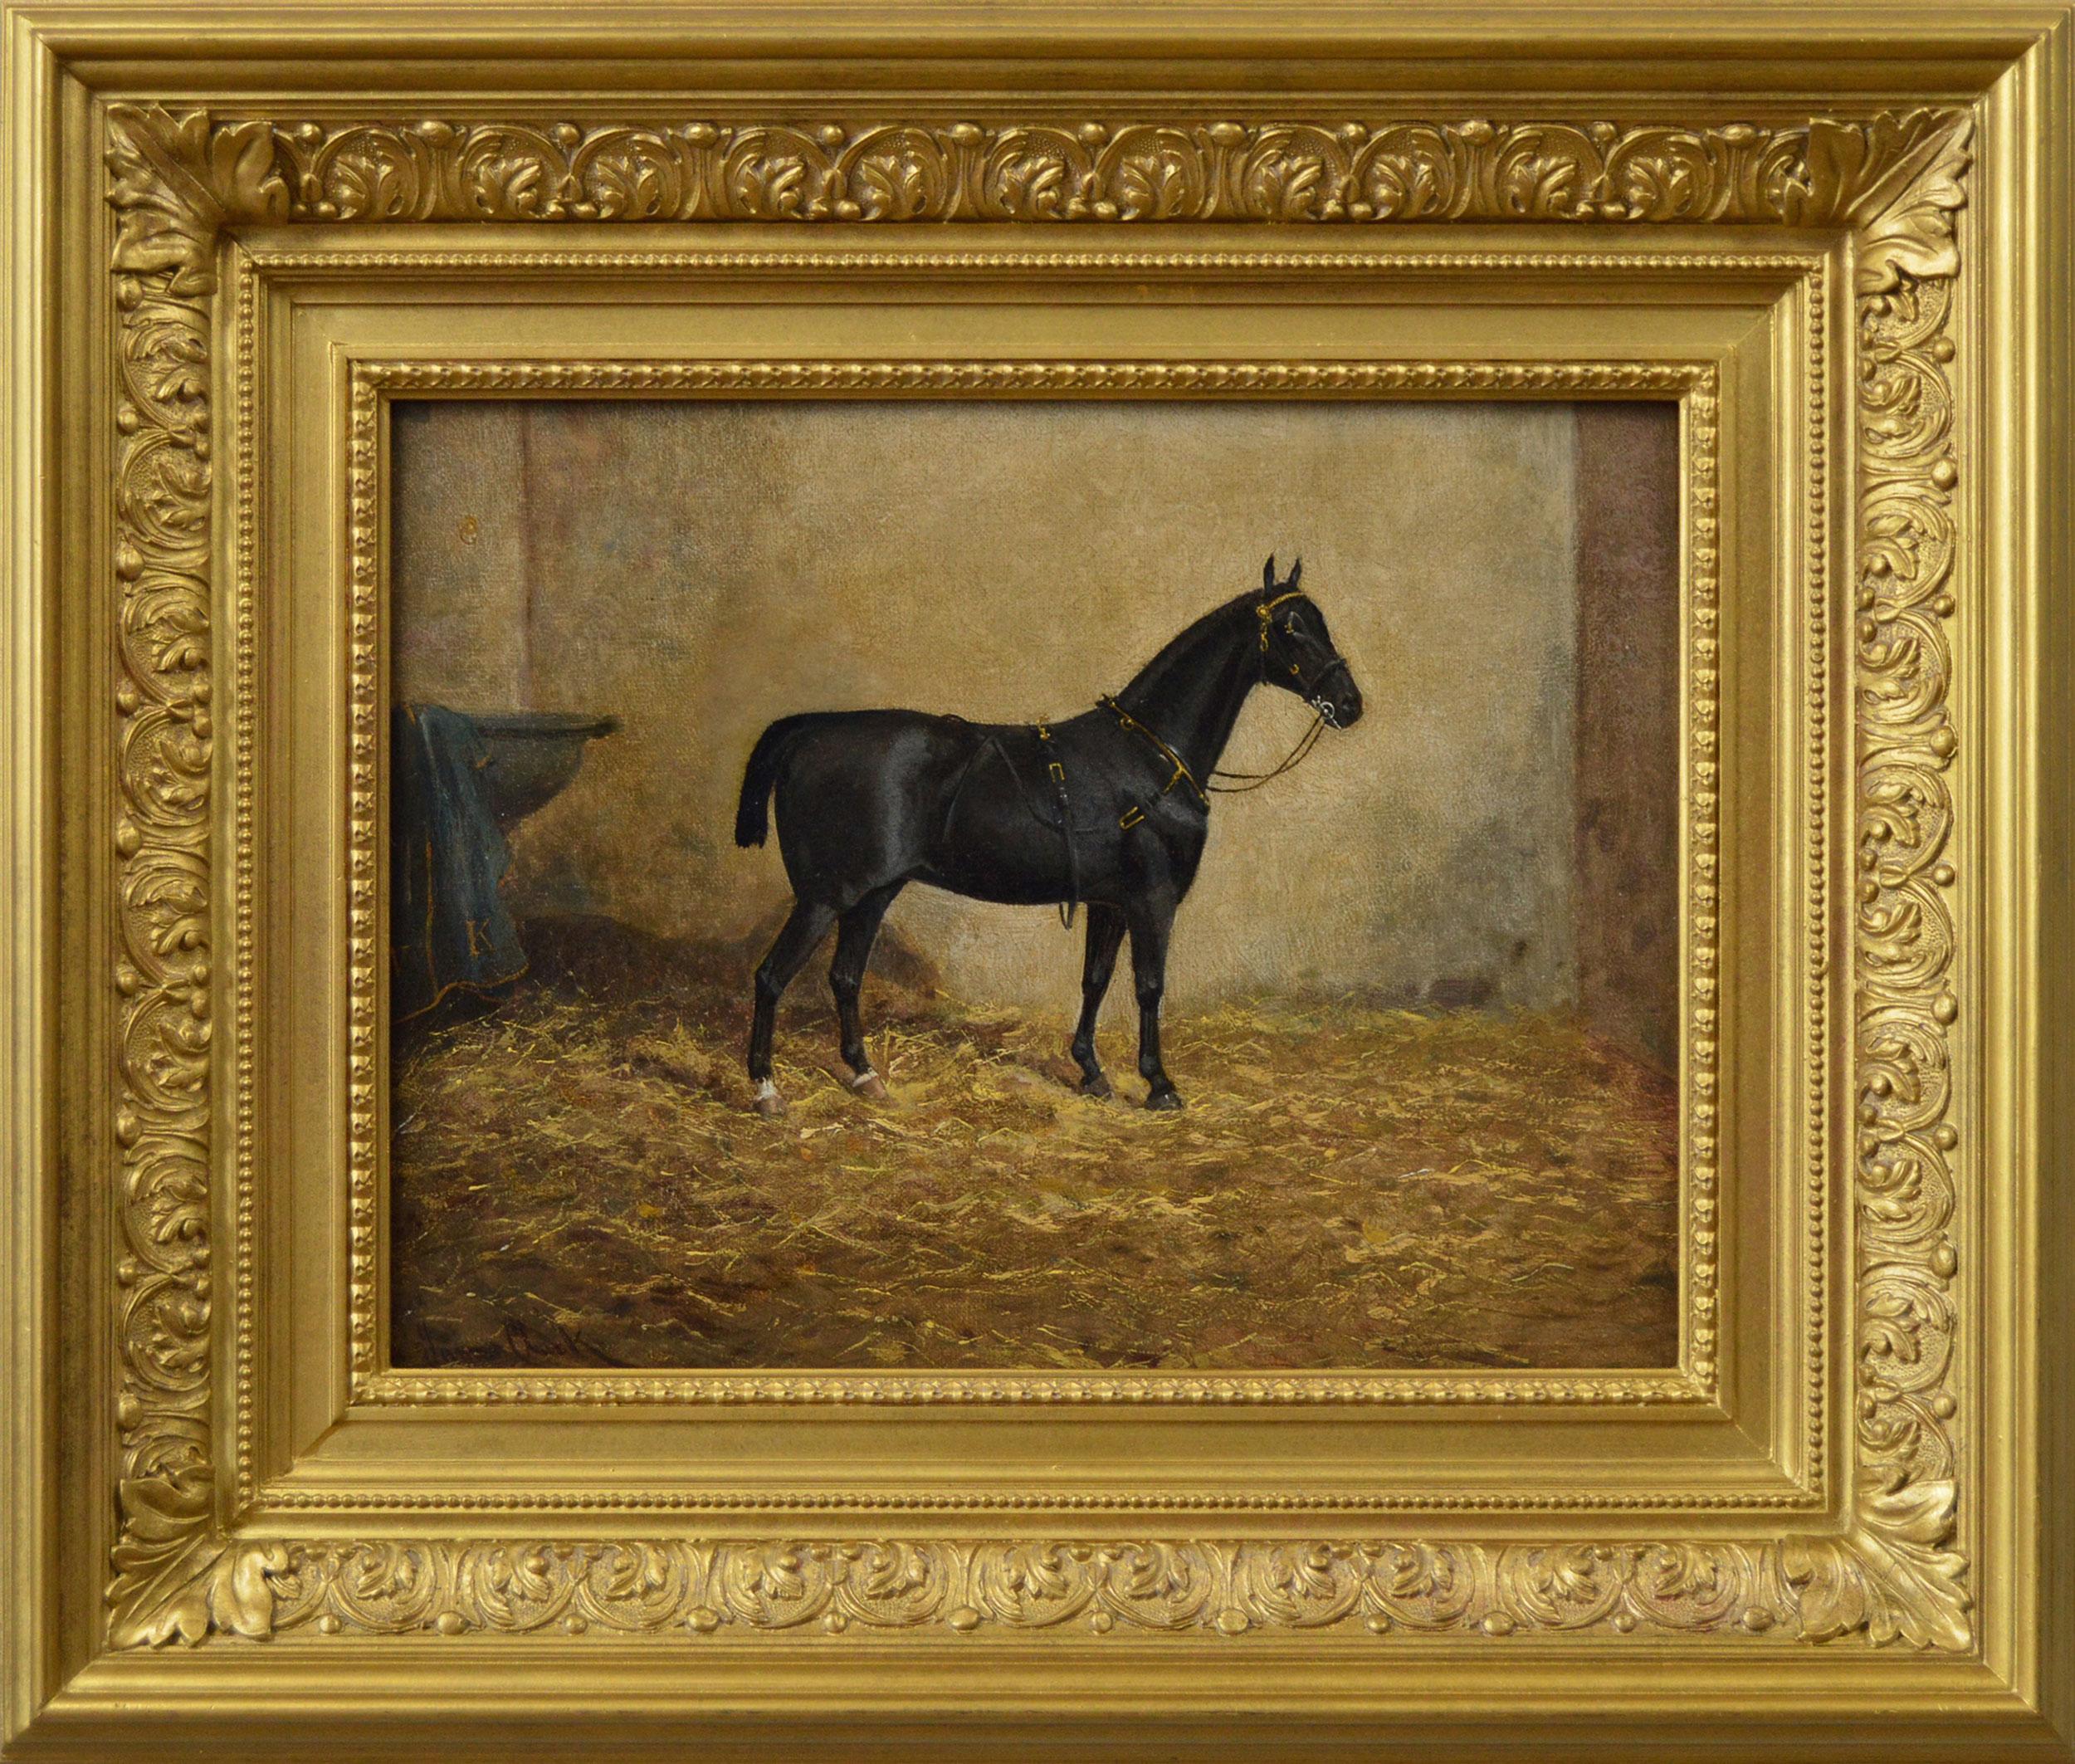 19th Century sporting horse portrait oil painting of a hackney mare 